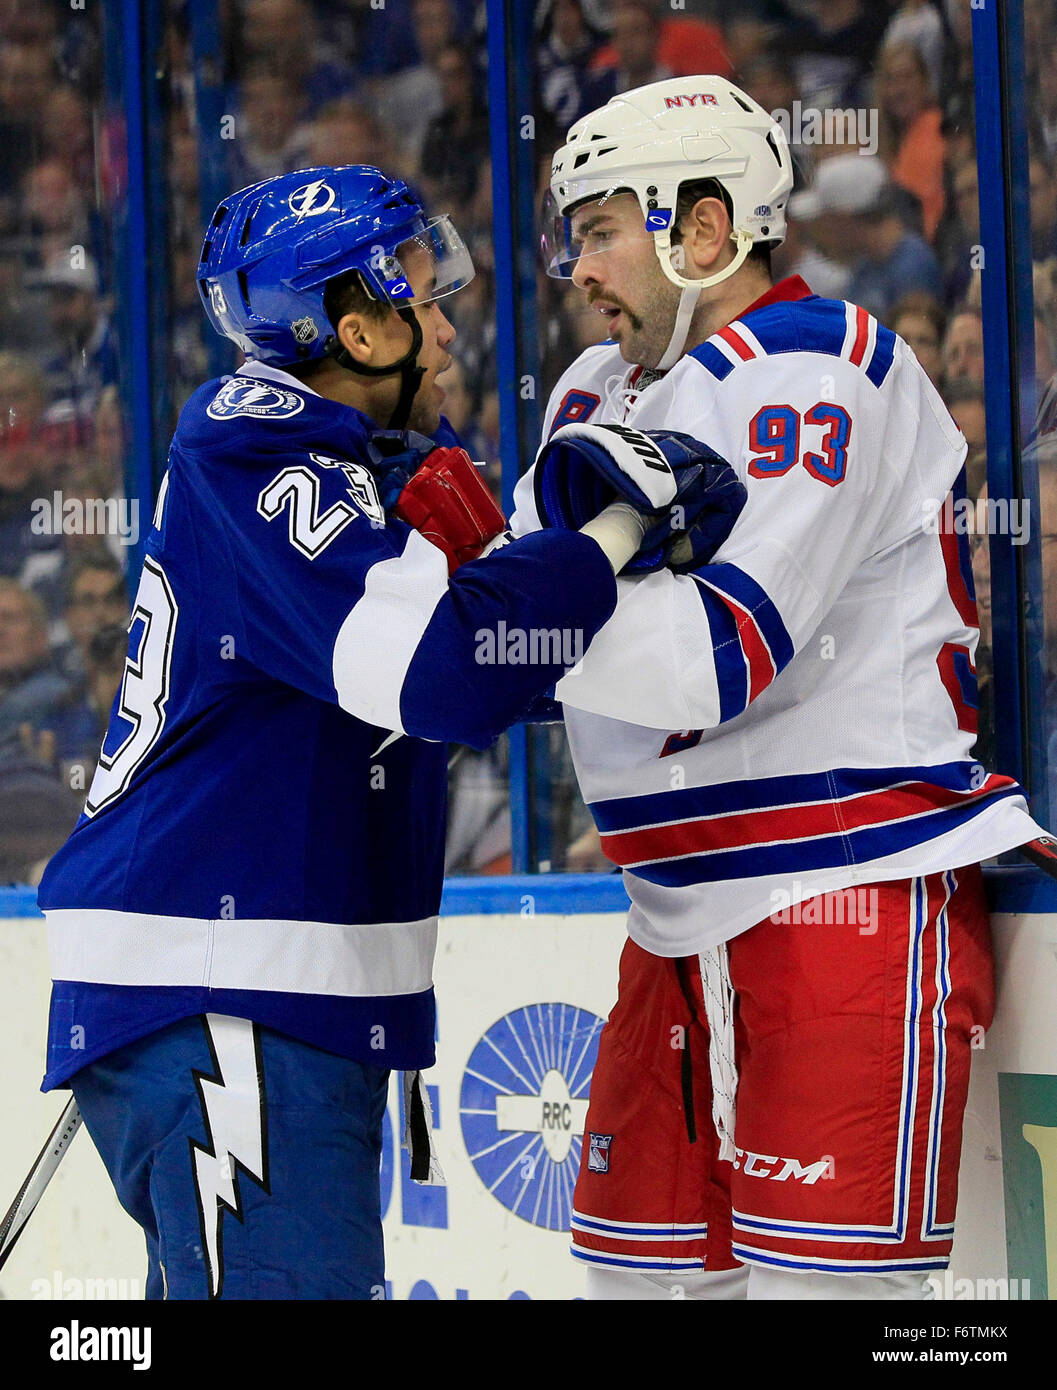 Tampa, Florida, USA. 19th Nov, 2015. DIRK SHADD | Times .Tampa Bay Lightning right wing J.T. Brown (23) and New York Rangers defenseman Keith Yandle (93) deal with each other during first period action at the Amalie Arena in Tampa Thursday evening (11/19/15). Brown appeared to get under the skin of his opponents, this time New York Rangers defenseman Dan Boyle (22) (not pictured) ended up joining Yandle in the altercation. Both Brown and Dan Boyle ended up picked up roughing penalties on the play. © Dirk Shadd/Tampa Bay Times/ZUMA Wire/Alamy Live News Stock Photo